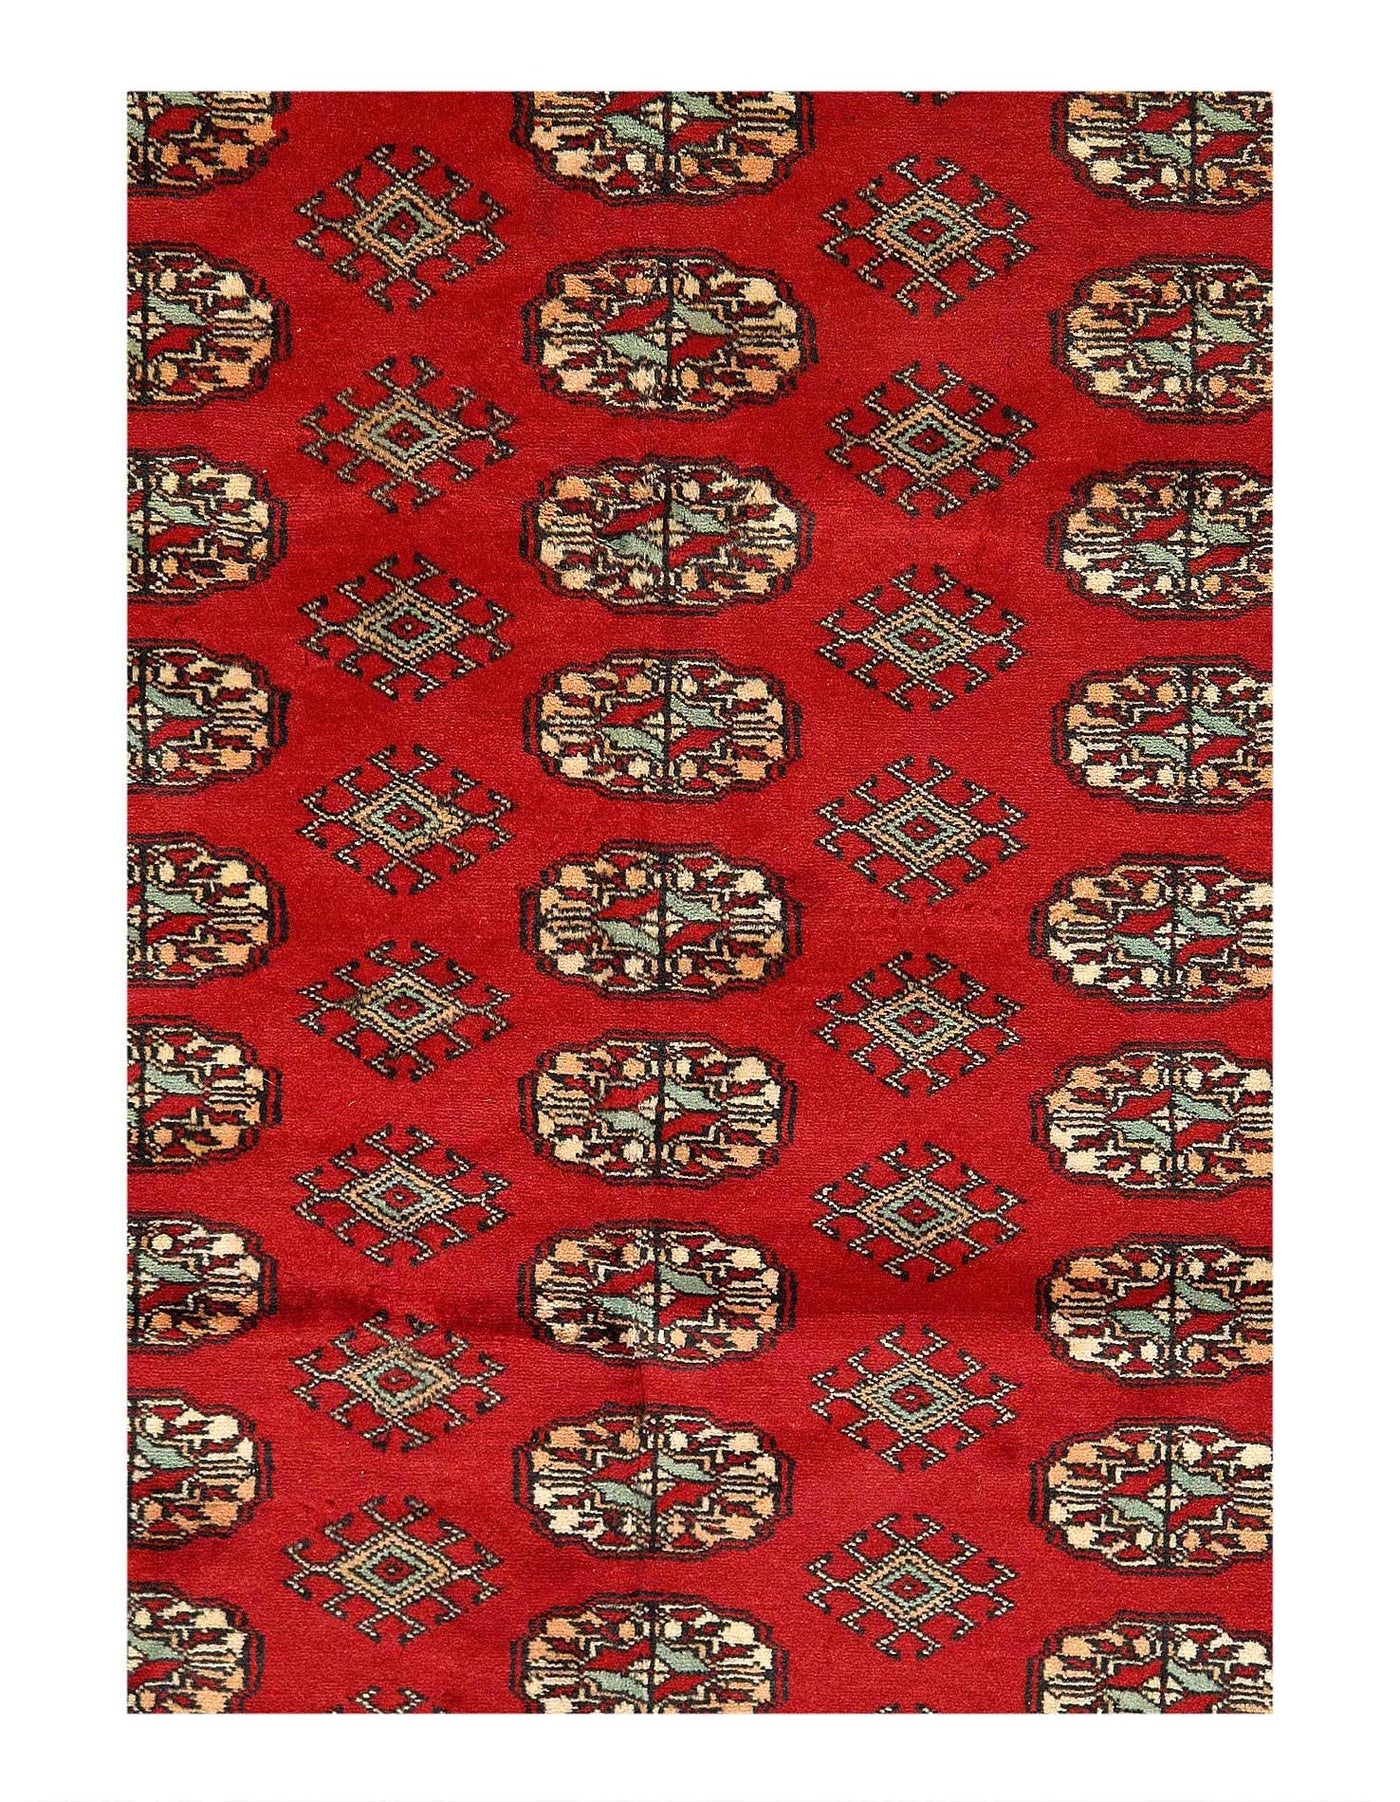 Canvello Fine Hand Knotted Bokhara Rug - 4' x 6'